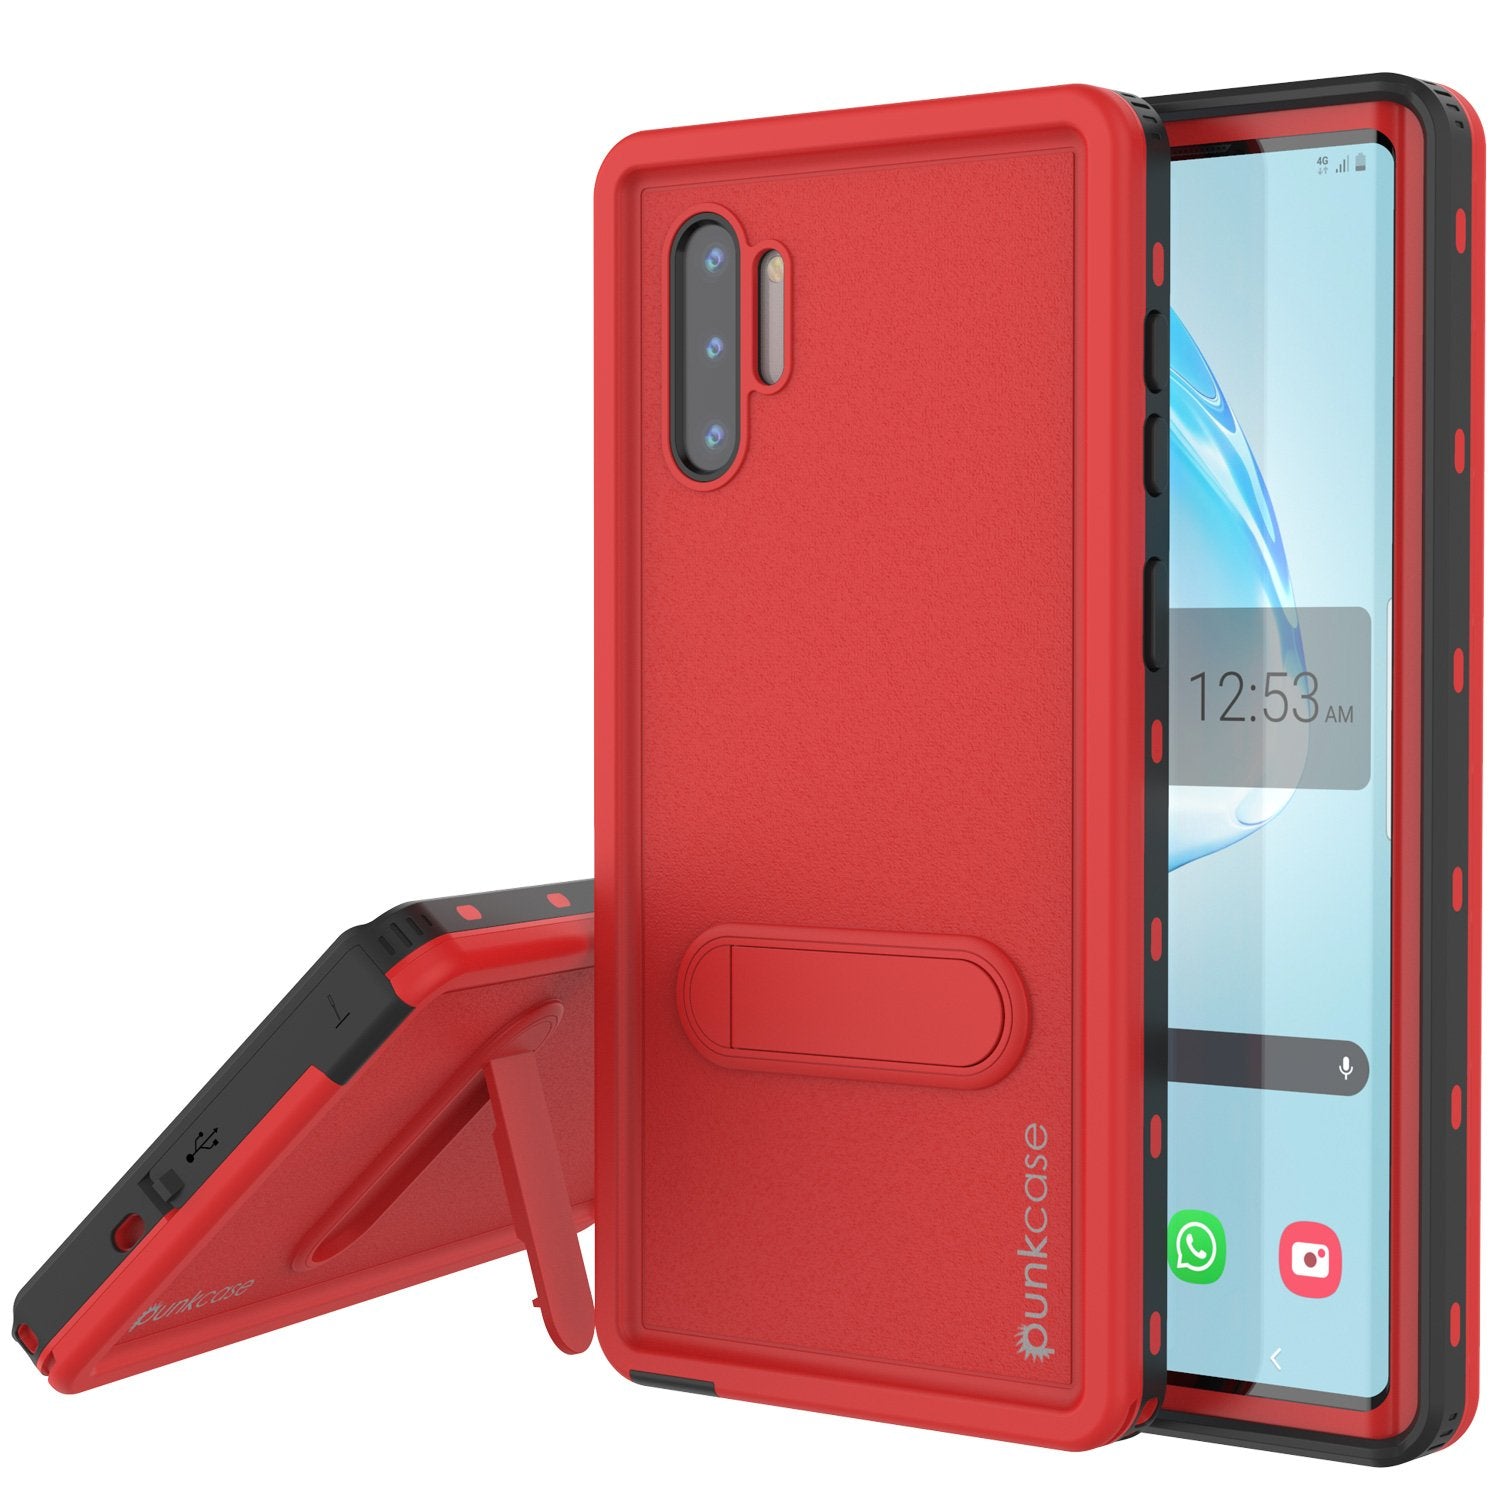 PunkCase Galaxy Note 10 Waterproof Case, [KickStud Series] Armor Cover [Red] (Color in image: Red)